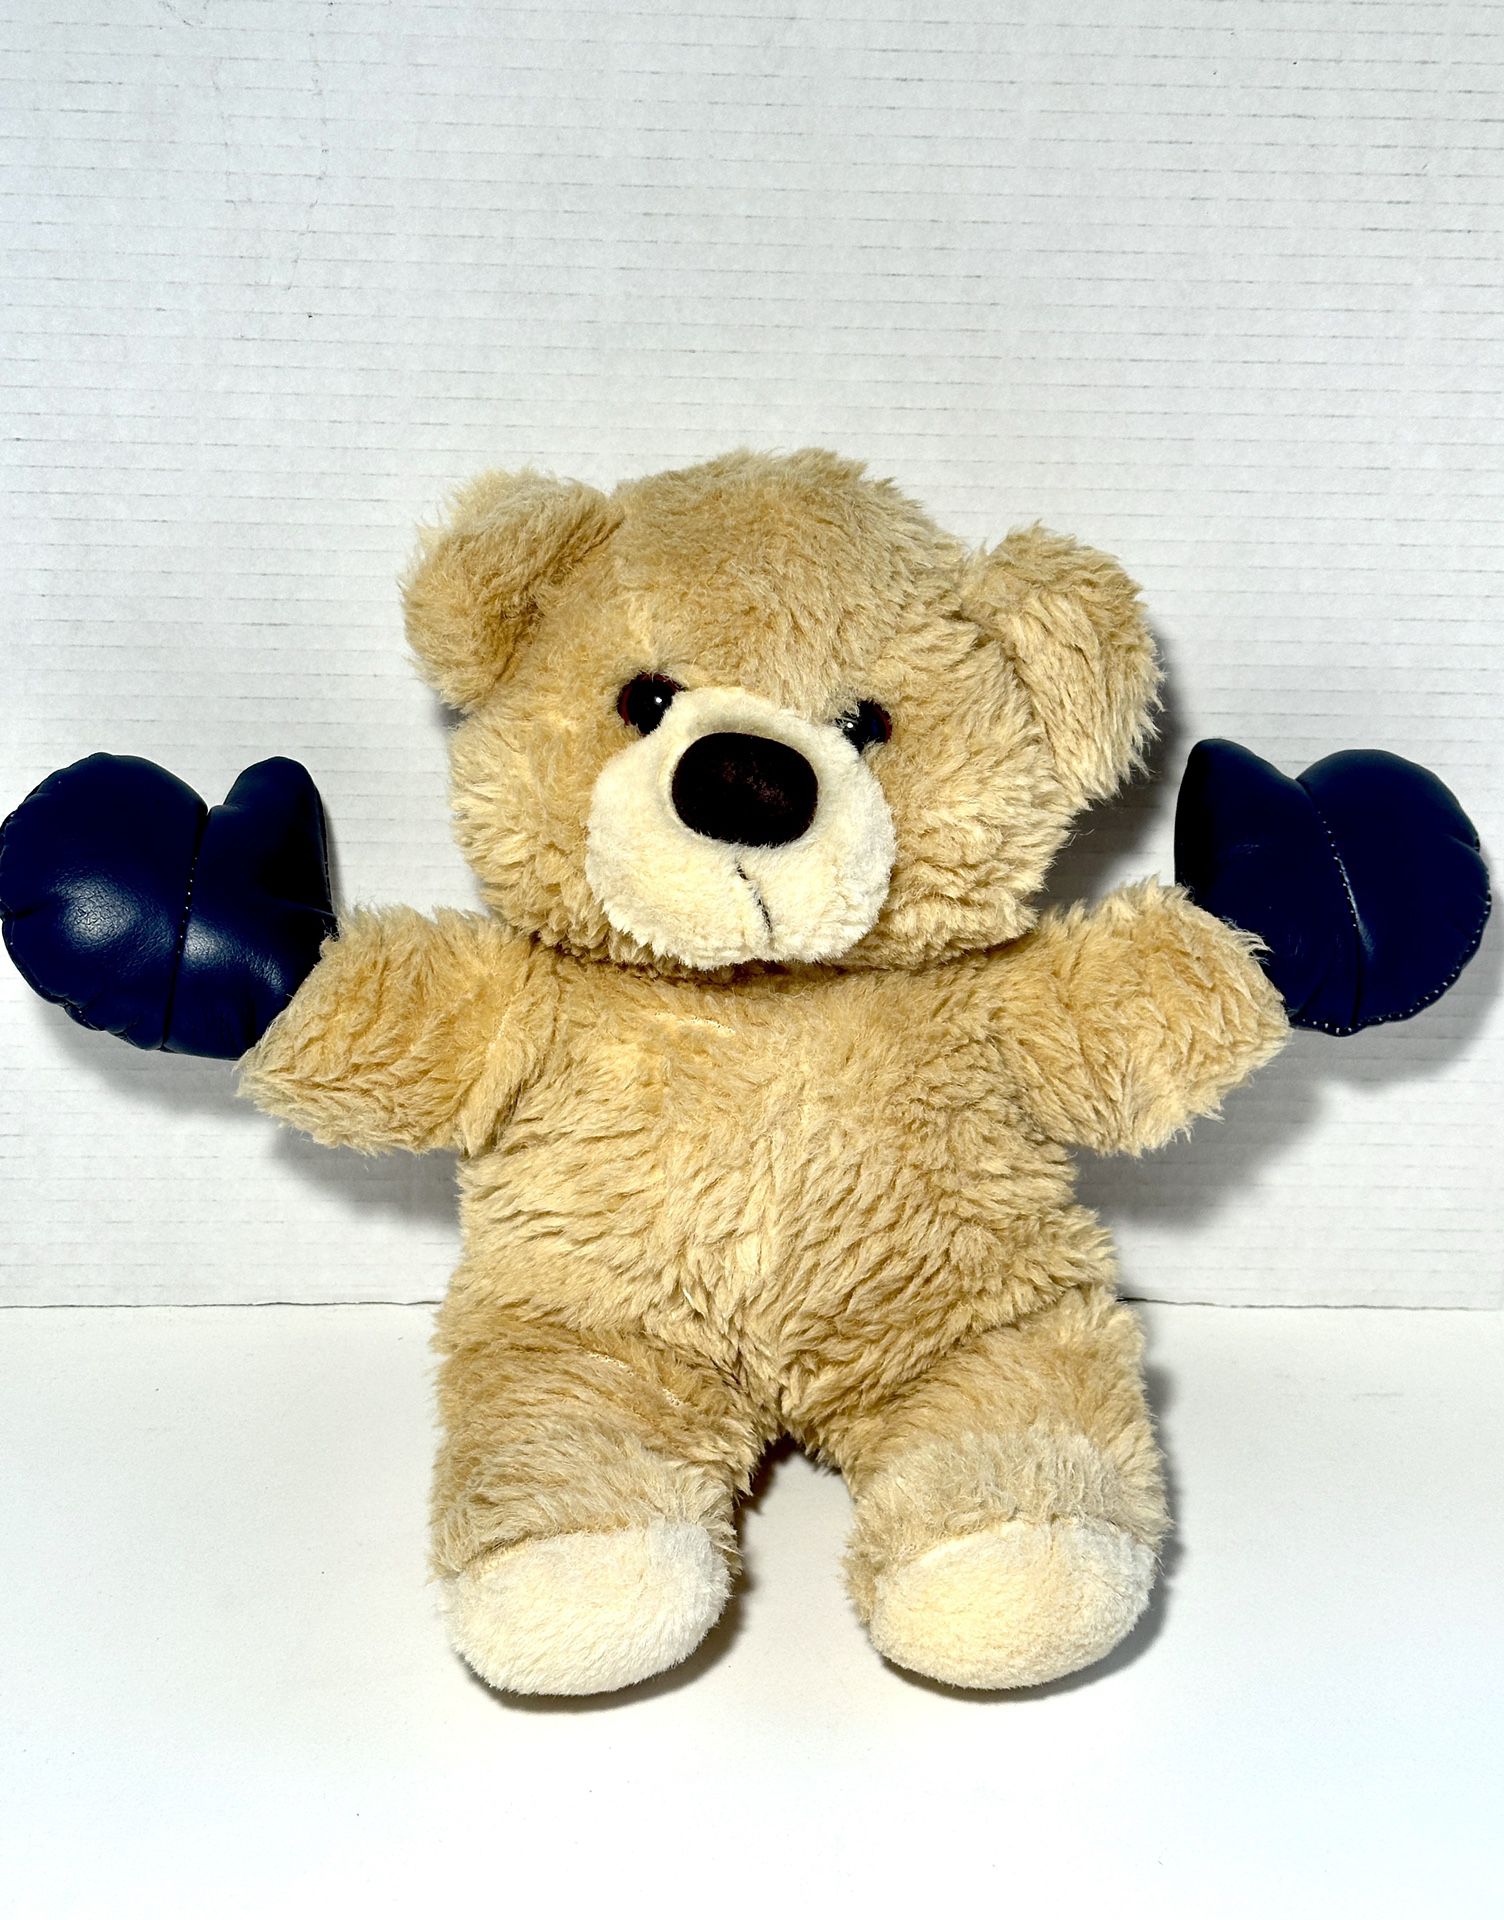 Vintage Fairview Industrial Corp. Teddy Bear With Blue Boxing Gloves Stuffed Plush